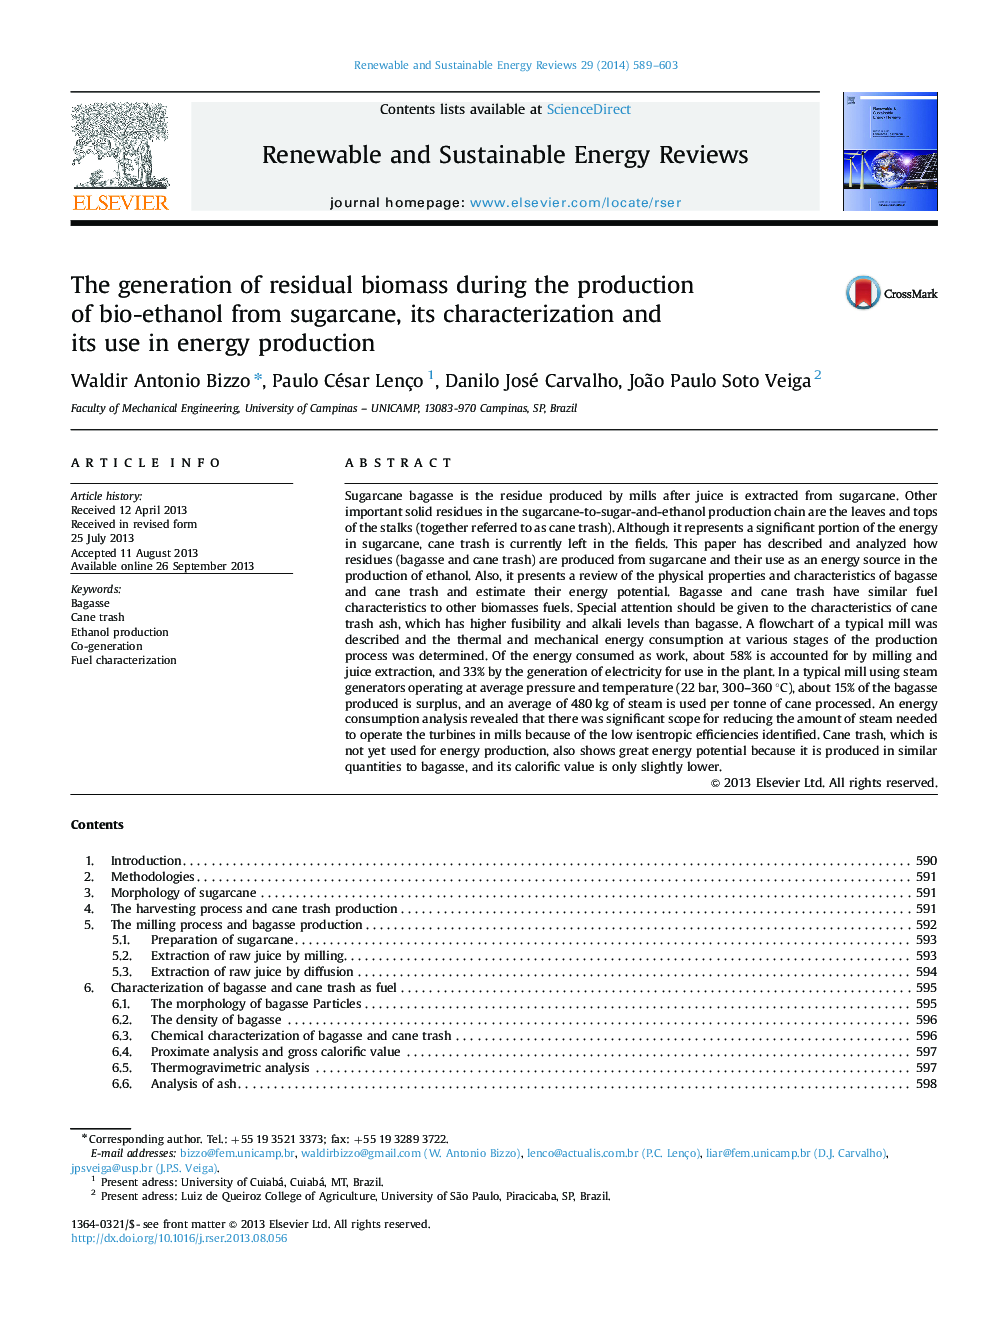 The generation of residual biomass during the production of bio-ethanol from sugarcane, its characterization and its use in energy production